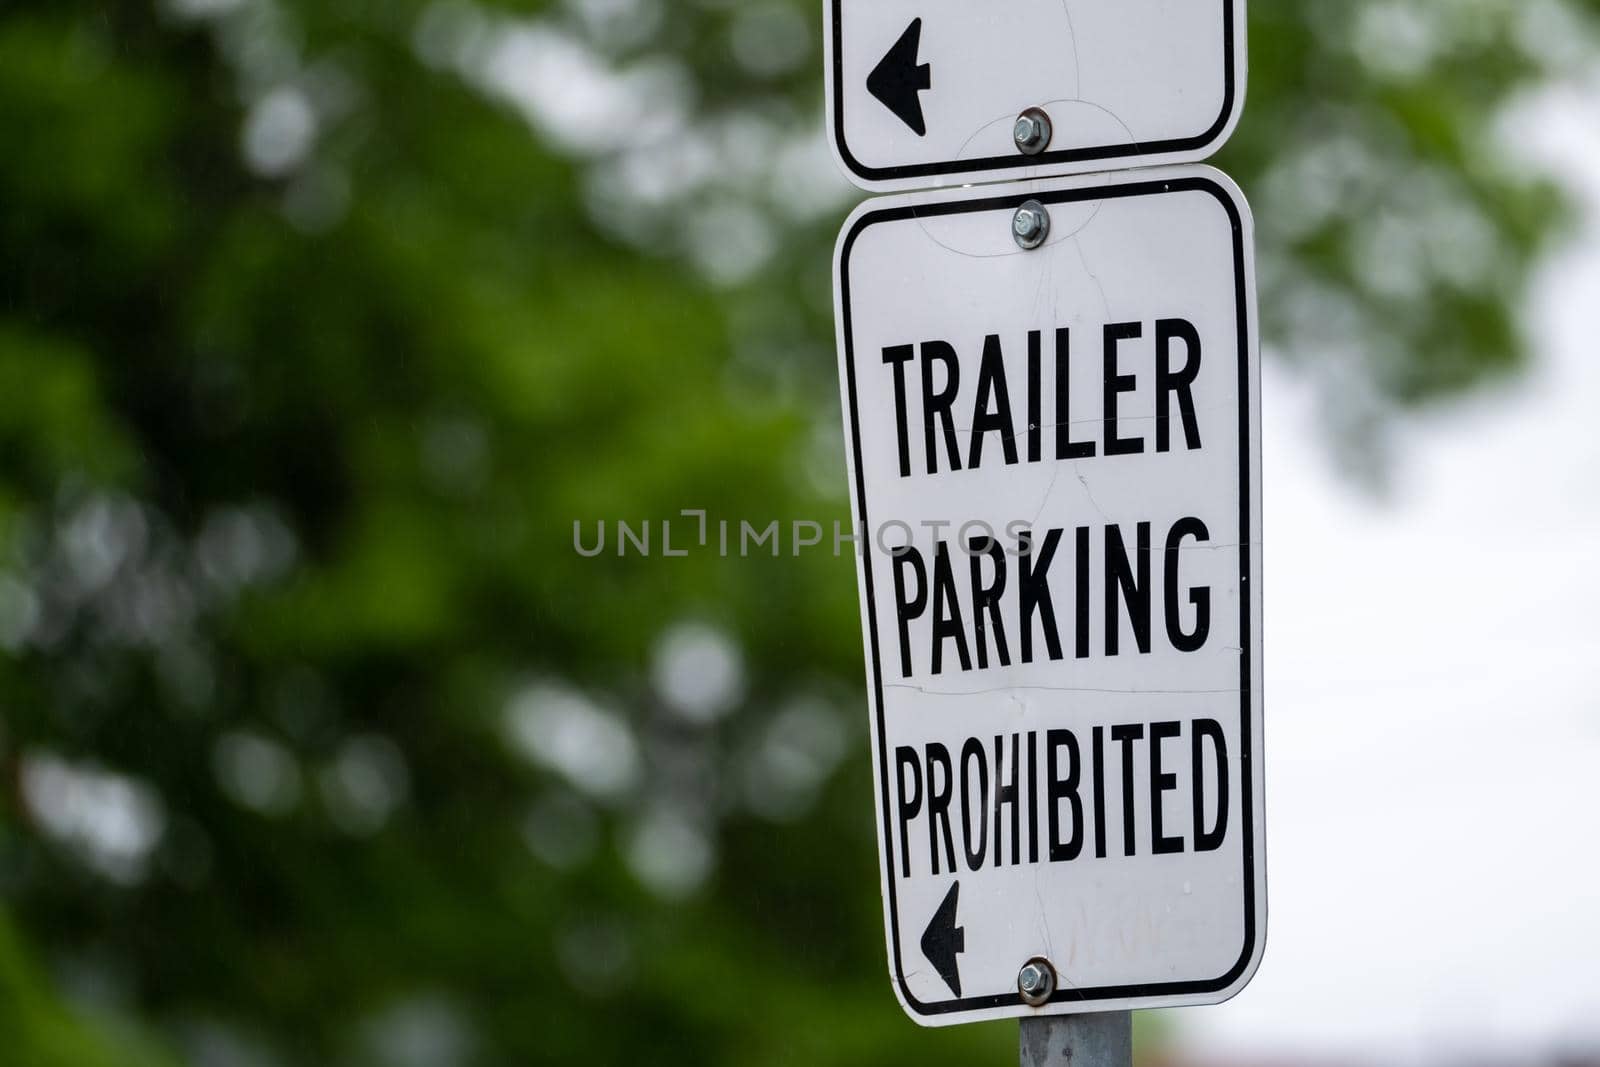 Trailer Parking Proibited sign by colintemple